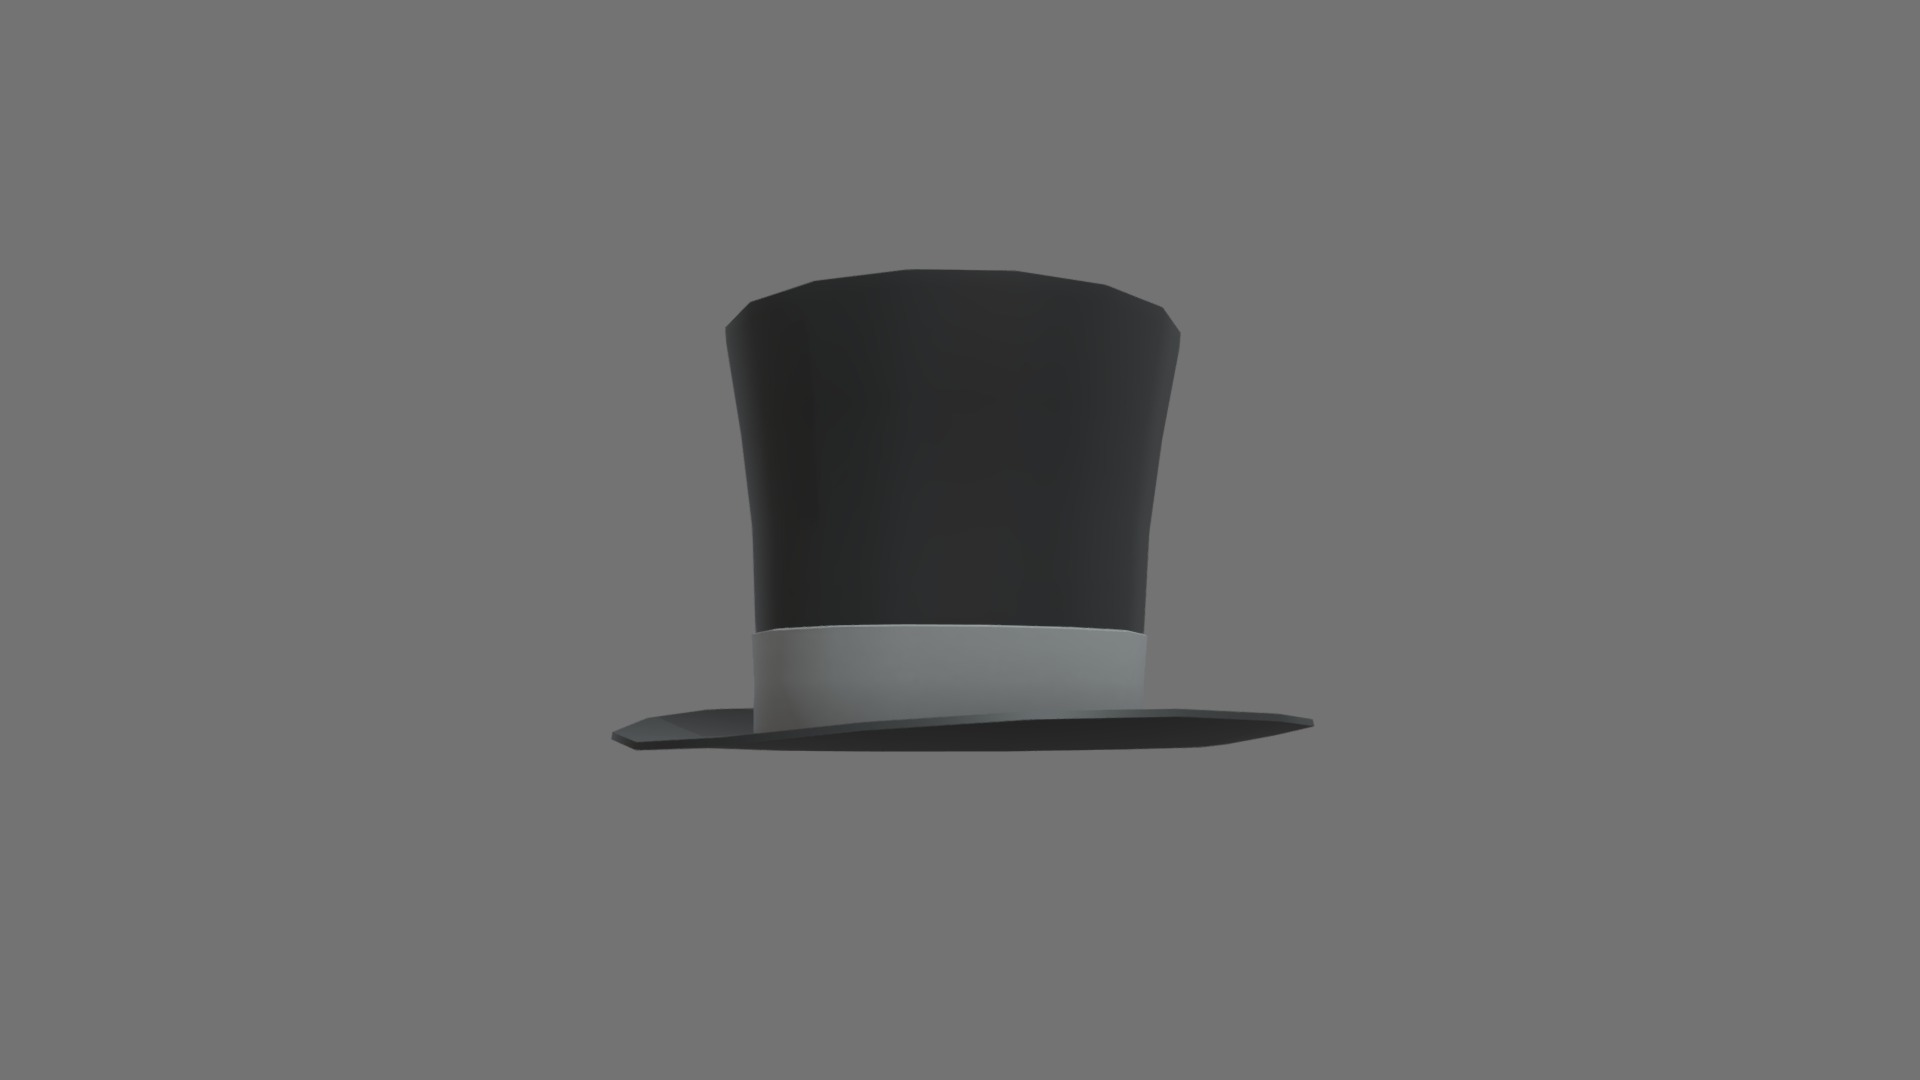 3D model Magician Hat - This is a 3D model of the Magician Hat. The 3D model is about a black hat on a table.